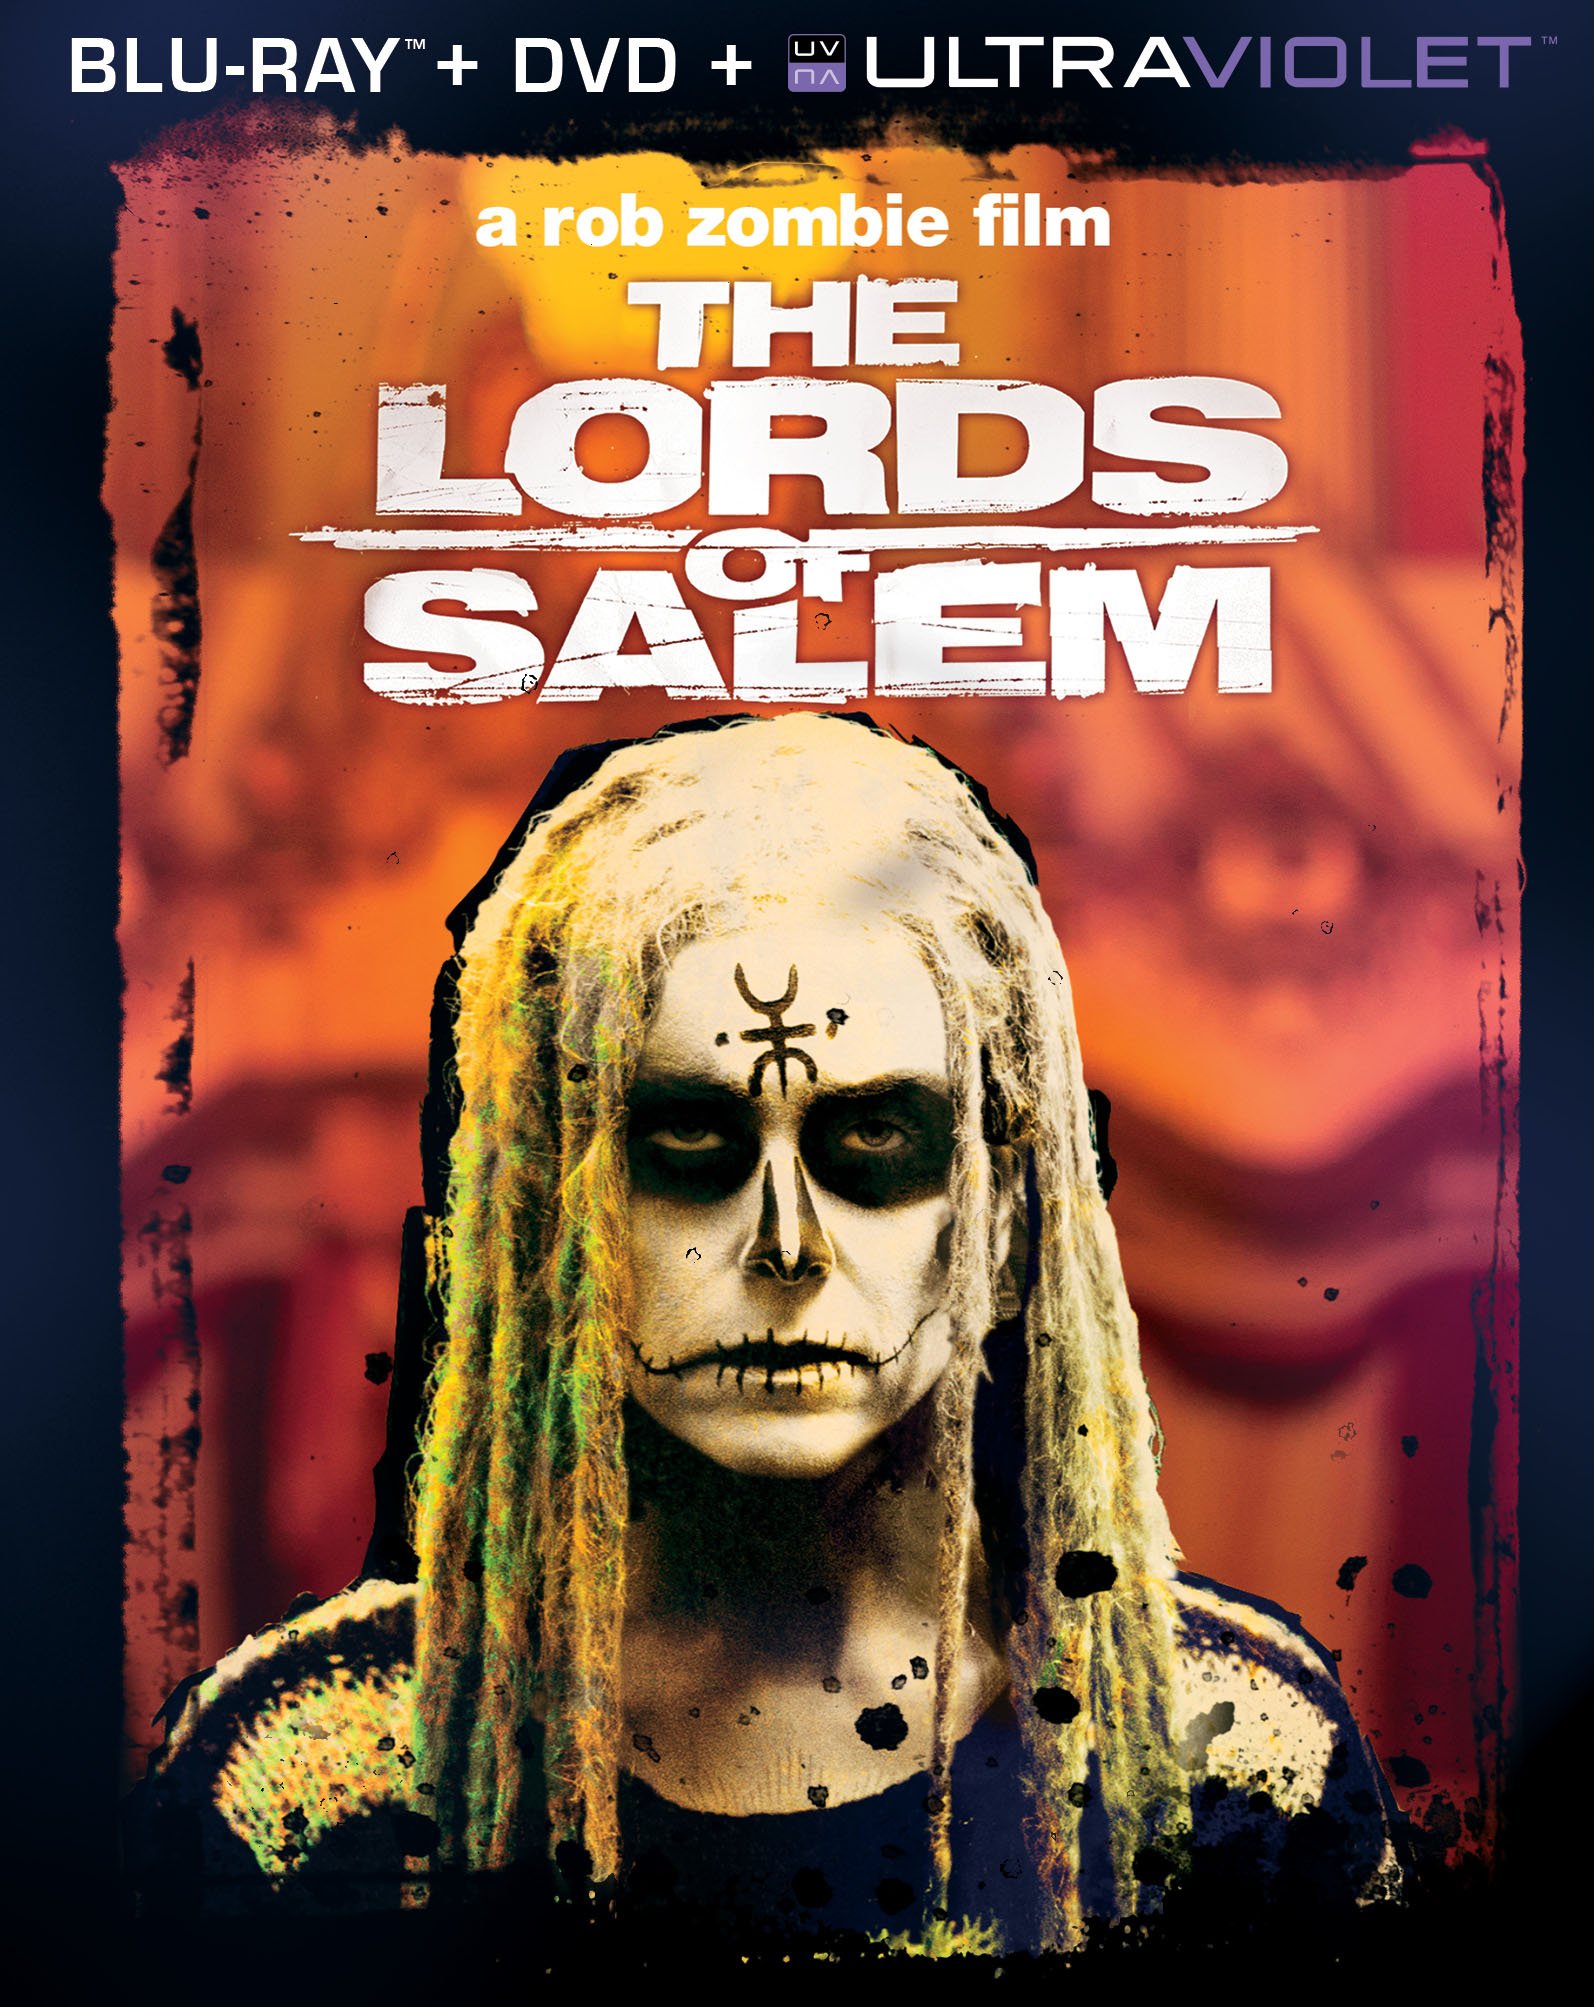 The Lords of Salem DVD Release Date September 3, 20131594 x 2007